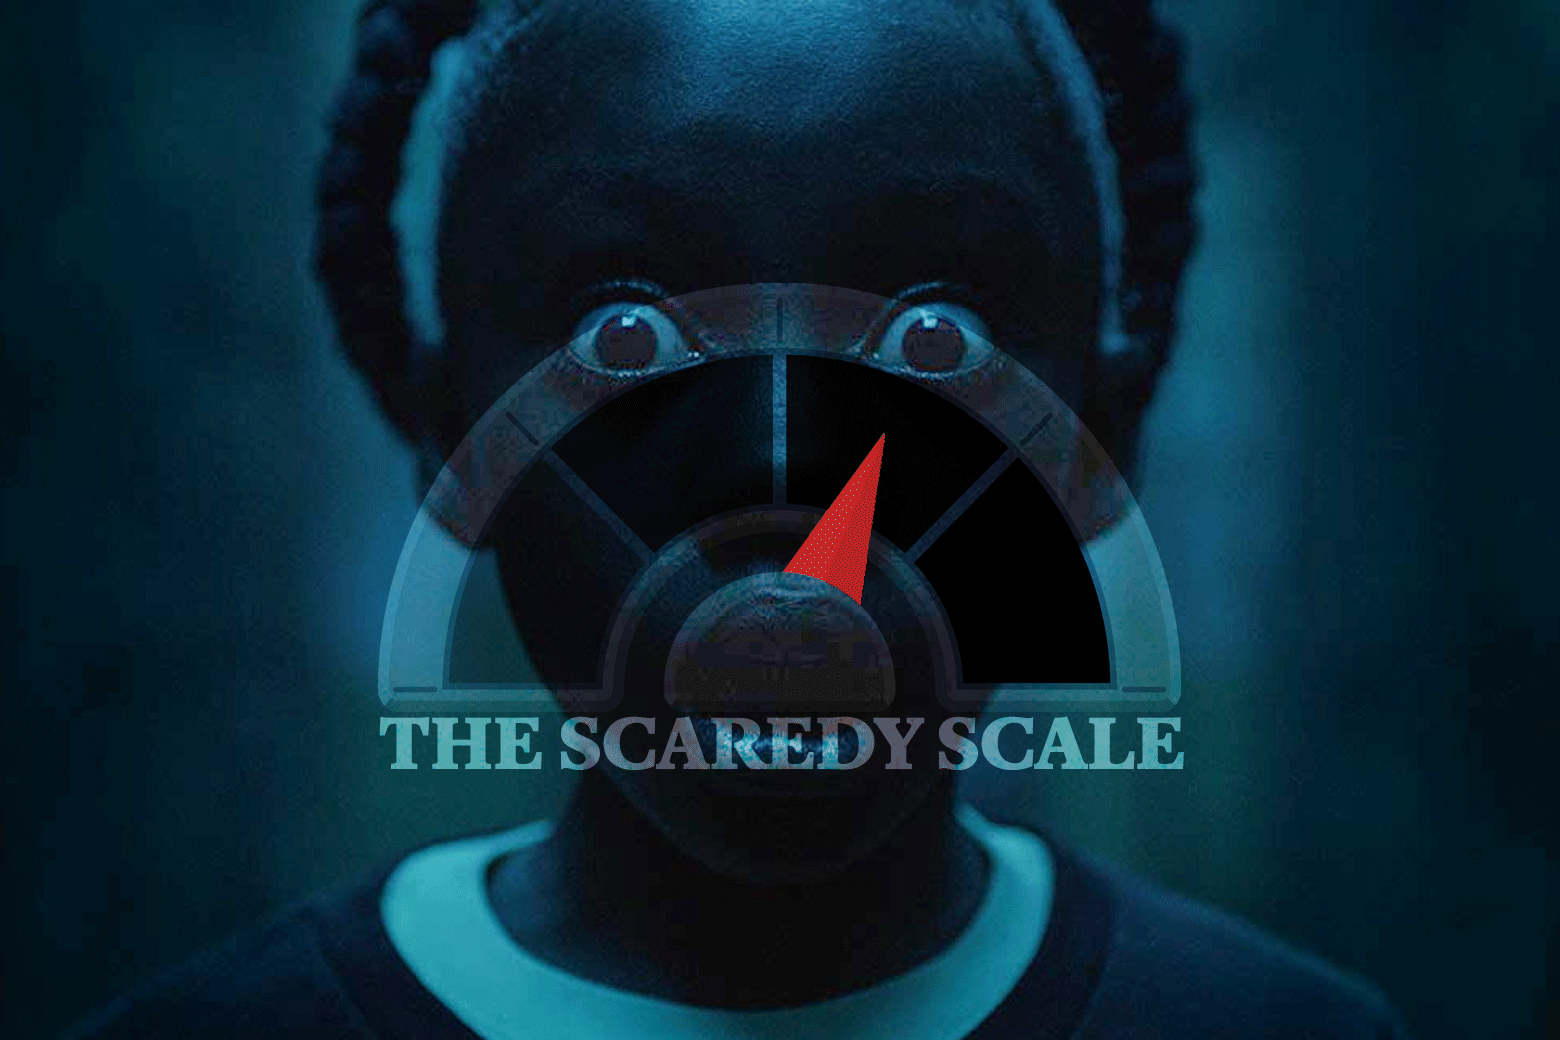 verbergen Weiland lawaai How scary is Us? Scarier than Get Out? Jordan Peele's new movie rated on  the Scaredy Scale.